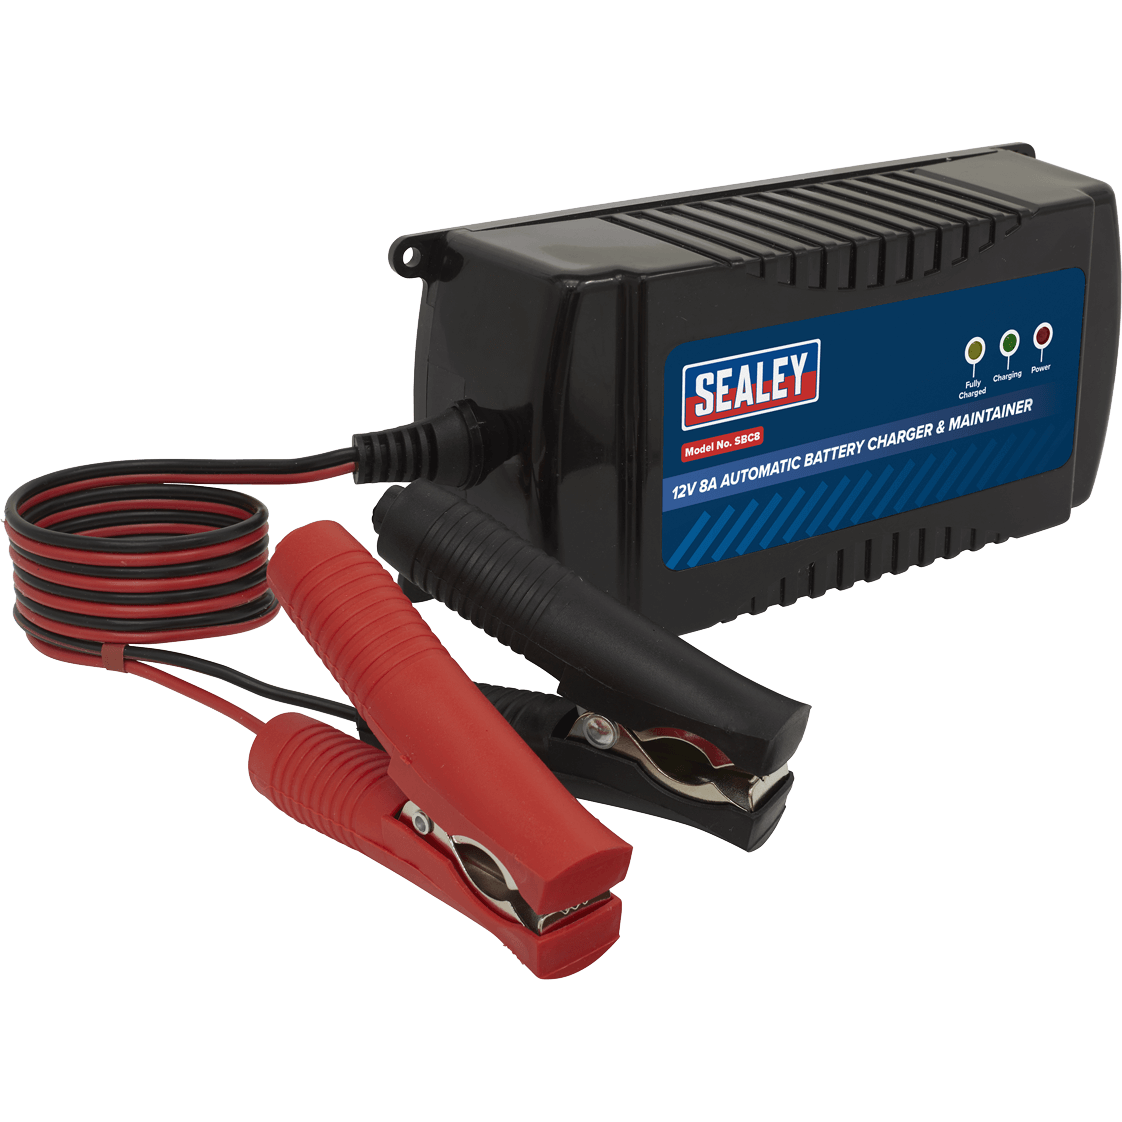 Photos - Car Service Station Equipment Sealey SBC8 Battery Charger and Maintainer 12V 8A Automatic 